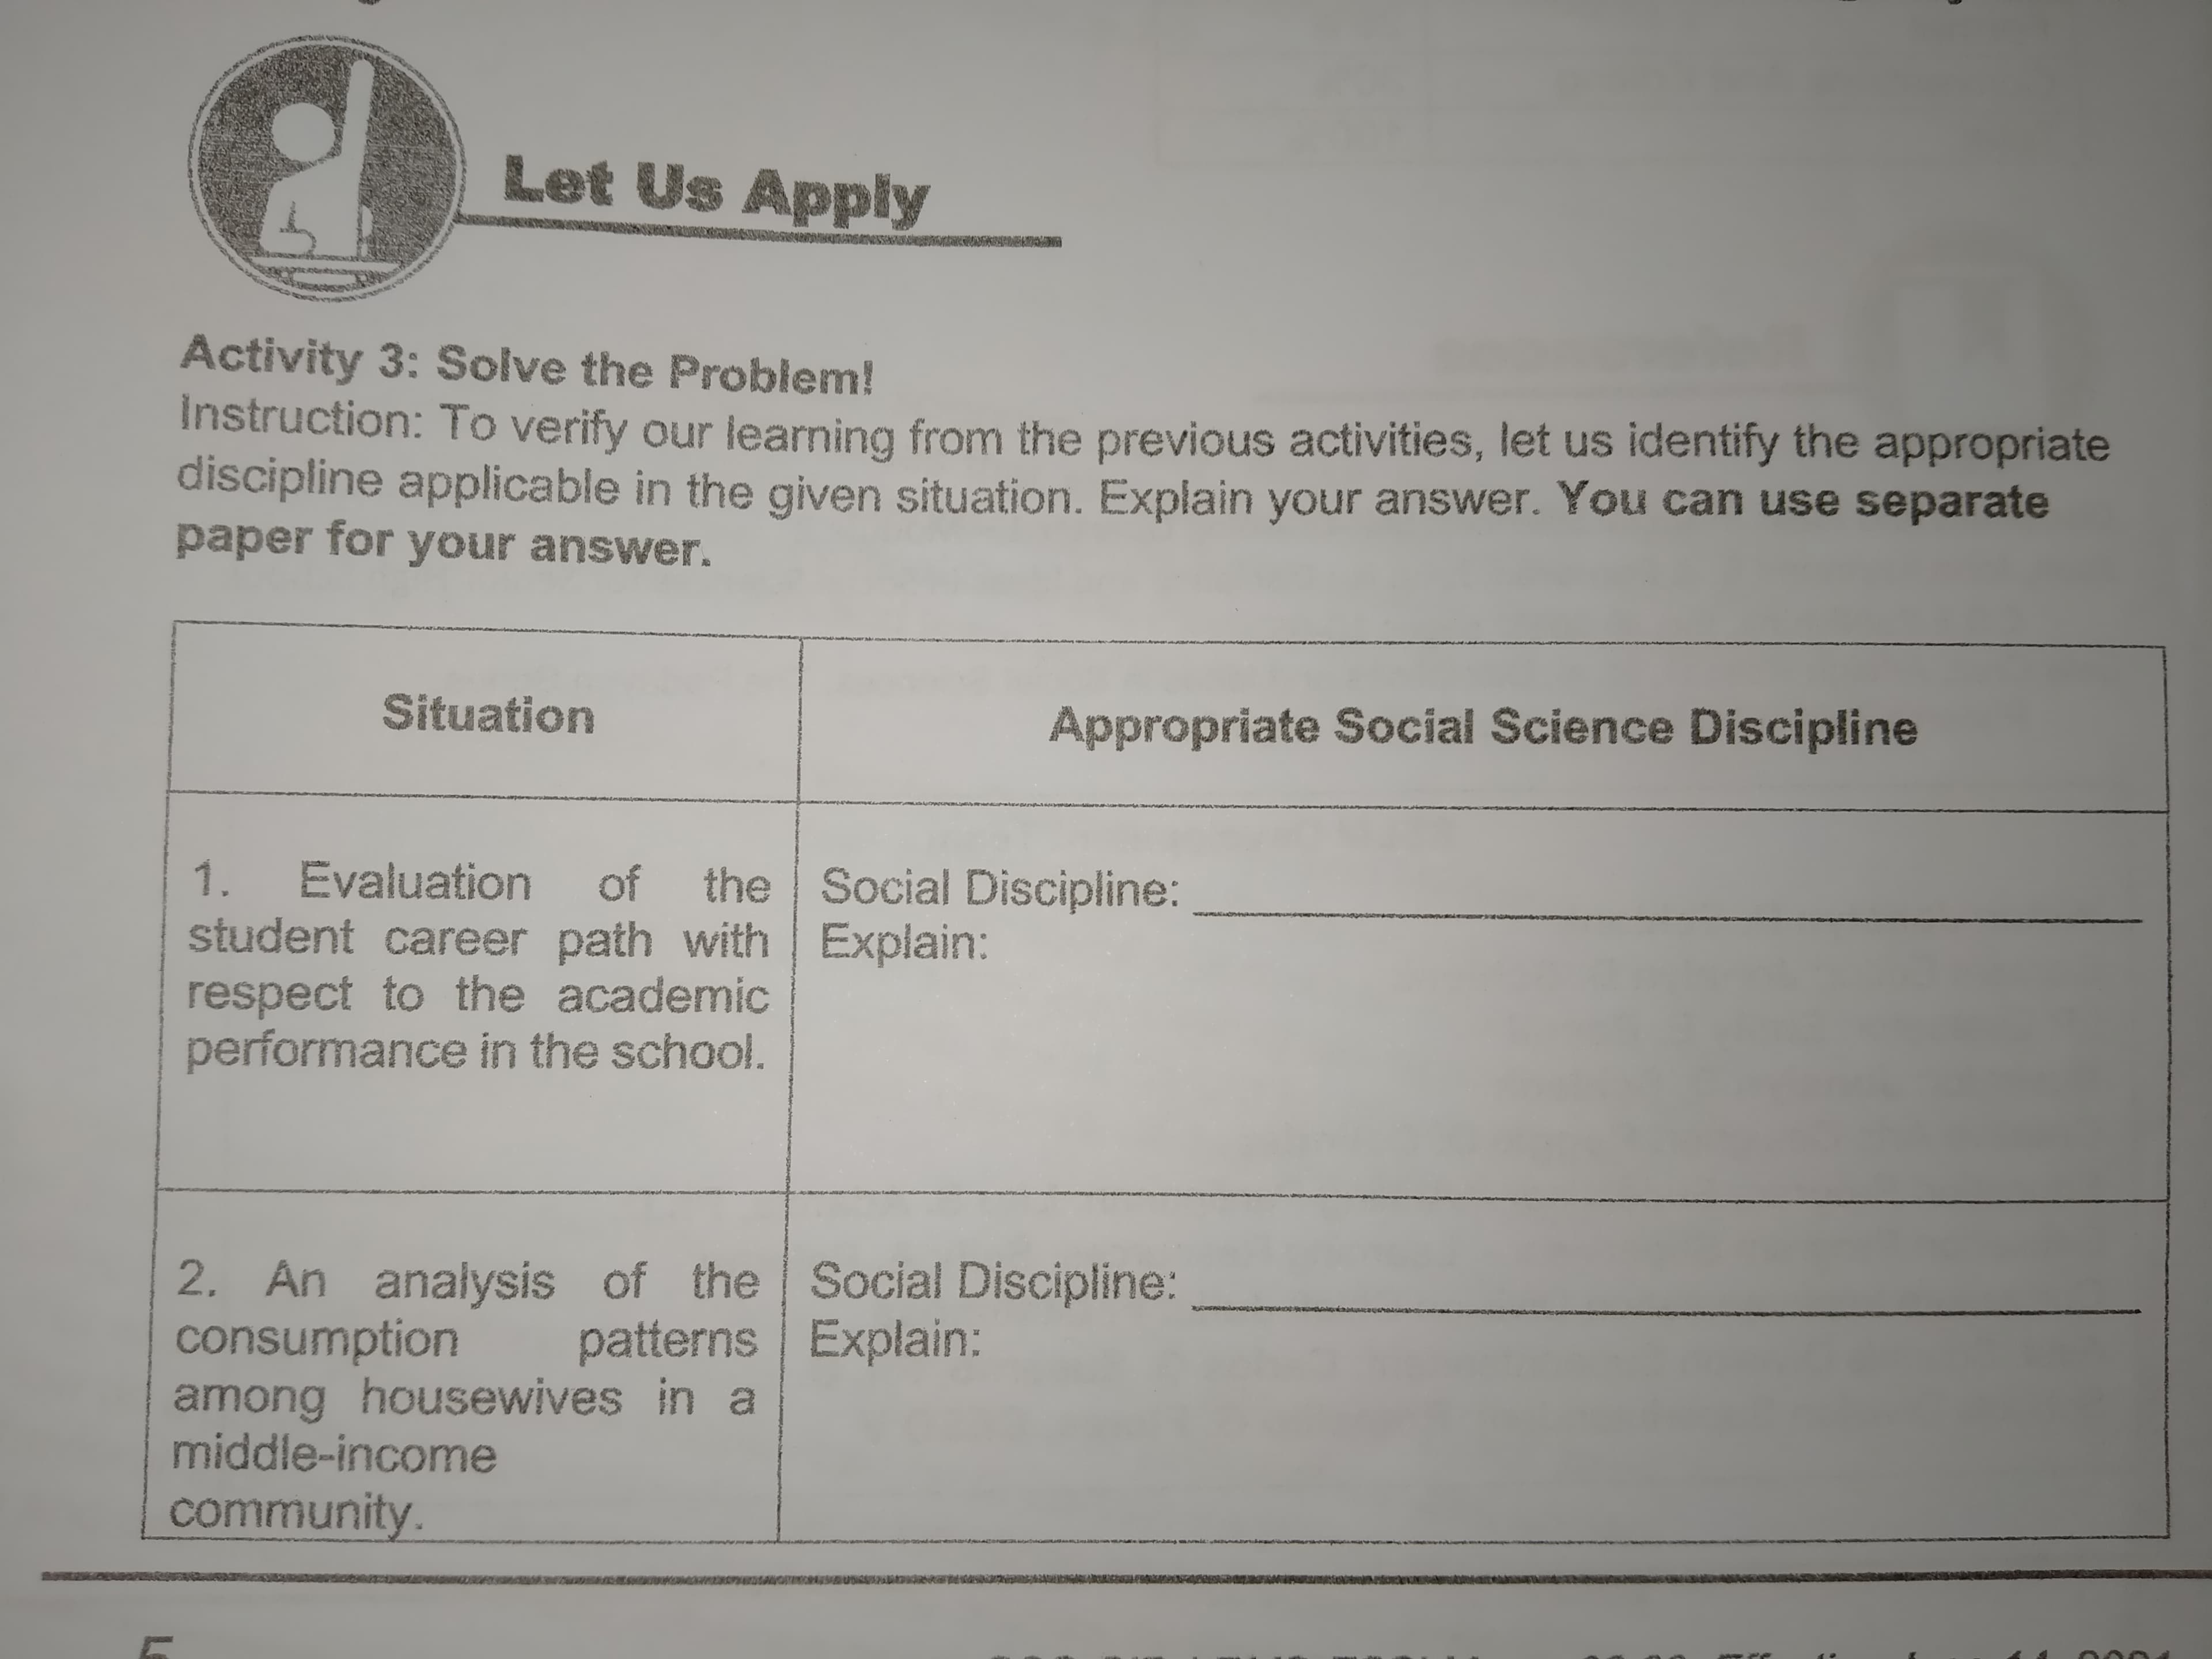 Let Us Apply
Activity 3: Solve the Problem!
Instruction: To verify our learning from the previous activities, let us identify the appropriate
discipline applicable in the given situation. Explain your answer. You can use separate
paper for your answer.
Situation
Appropriate Social Science Discipline
ertys
of the Social Discipline:
1.
Evaluation
student career path with Explain:
respect to the academic
performance the school.
2. An analysis of the Social Discipline:
patterns Explain:
2. An
consumption
among housewives in a
middle-income
community.
